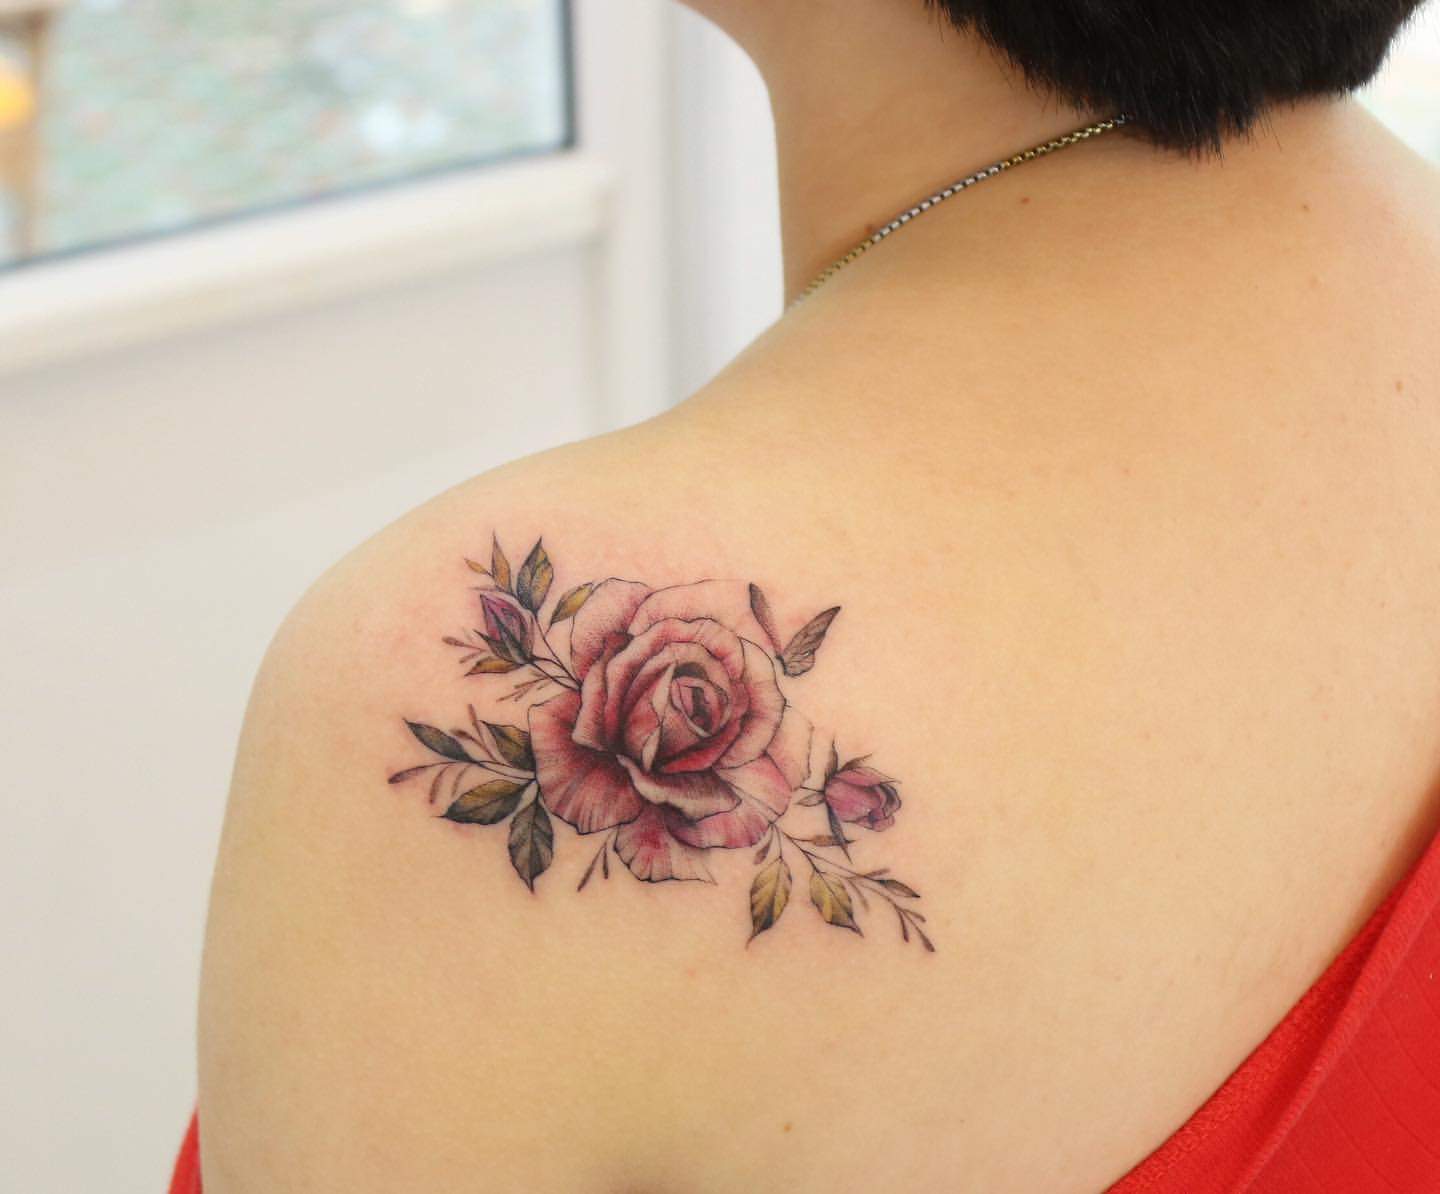 96 Gorgeous Rose Tattoos For Men and Women - Our Mindful Life